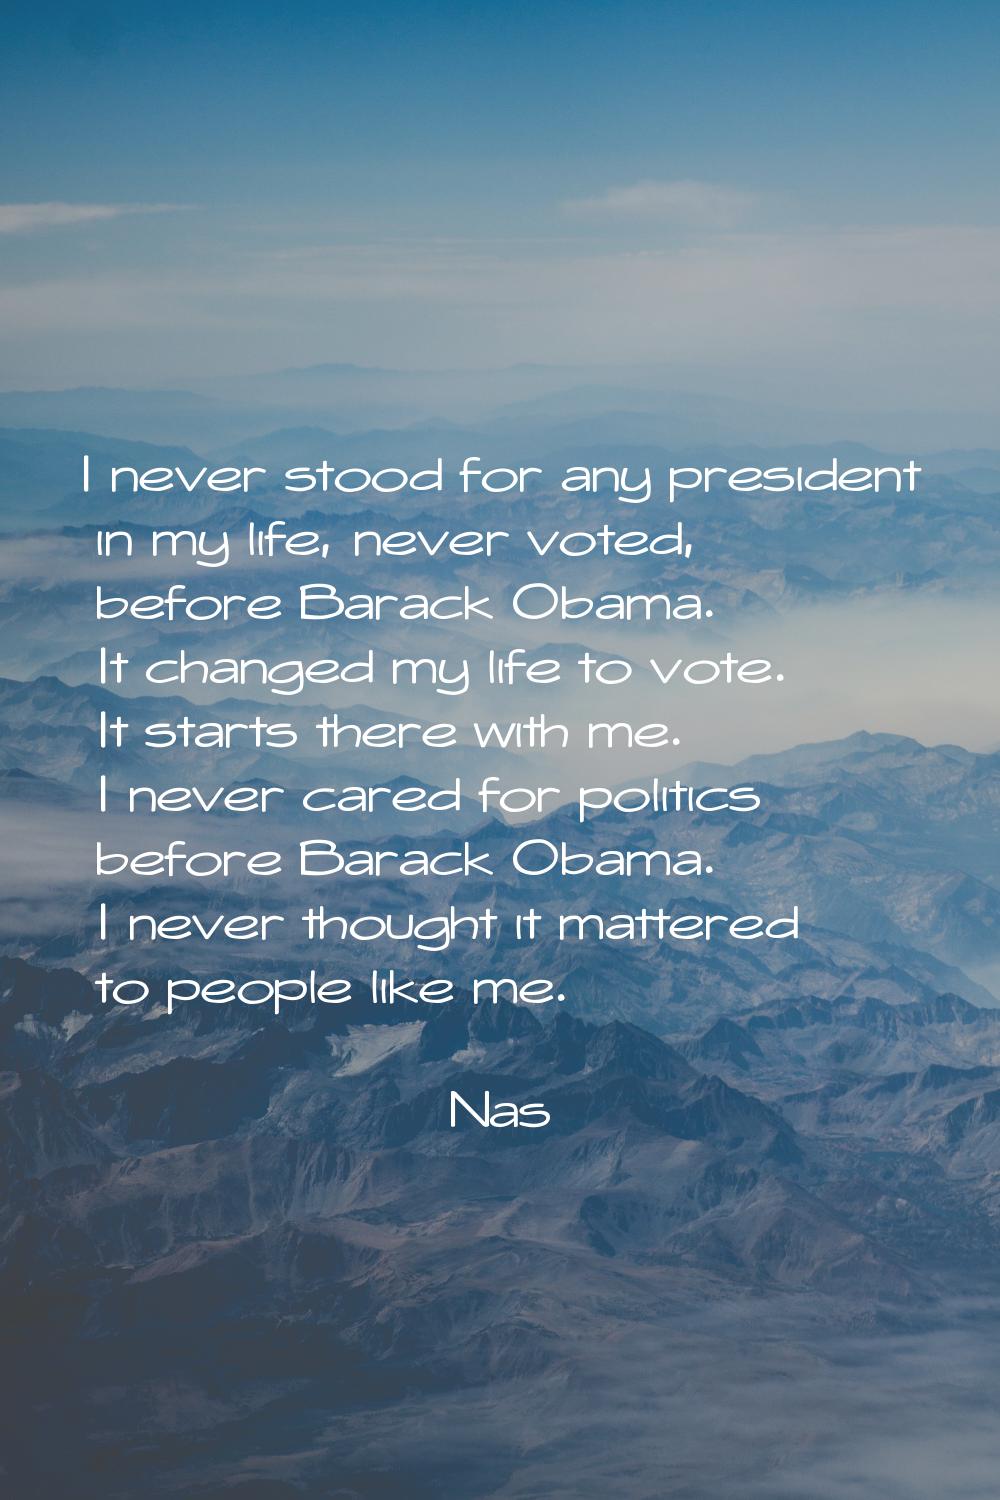 I never stood for any president in my life, never voted, before Barack Obama. It changed my life to